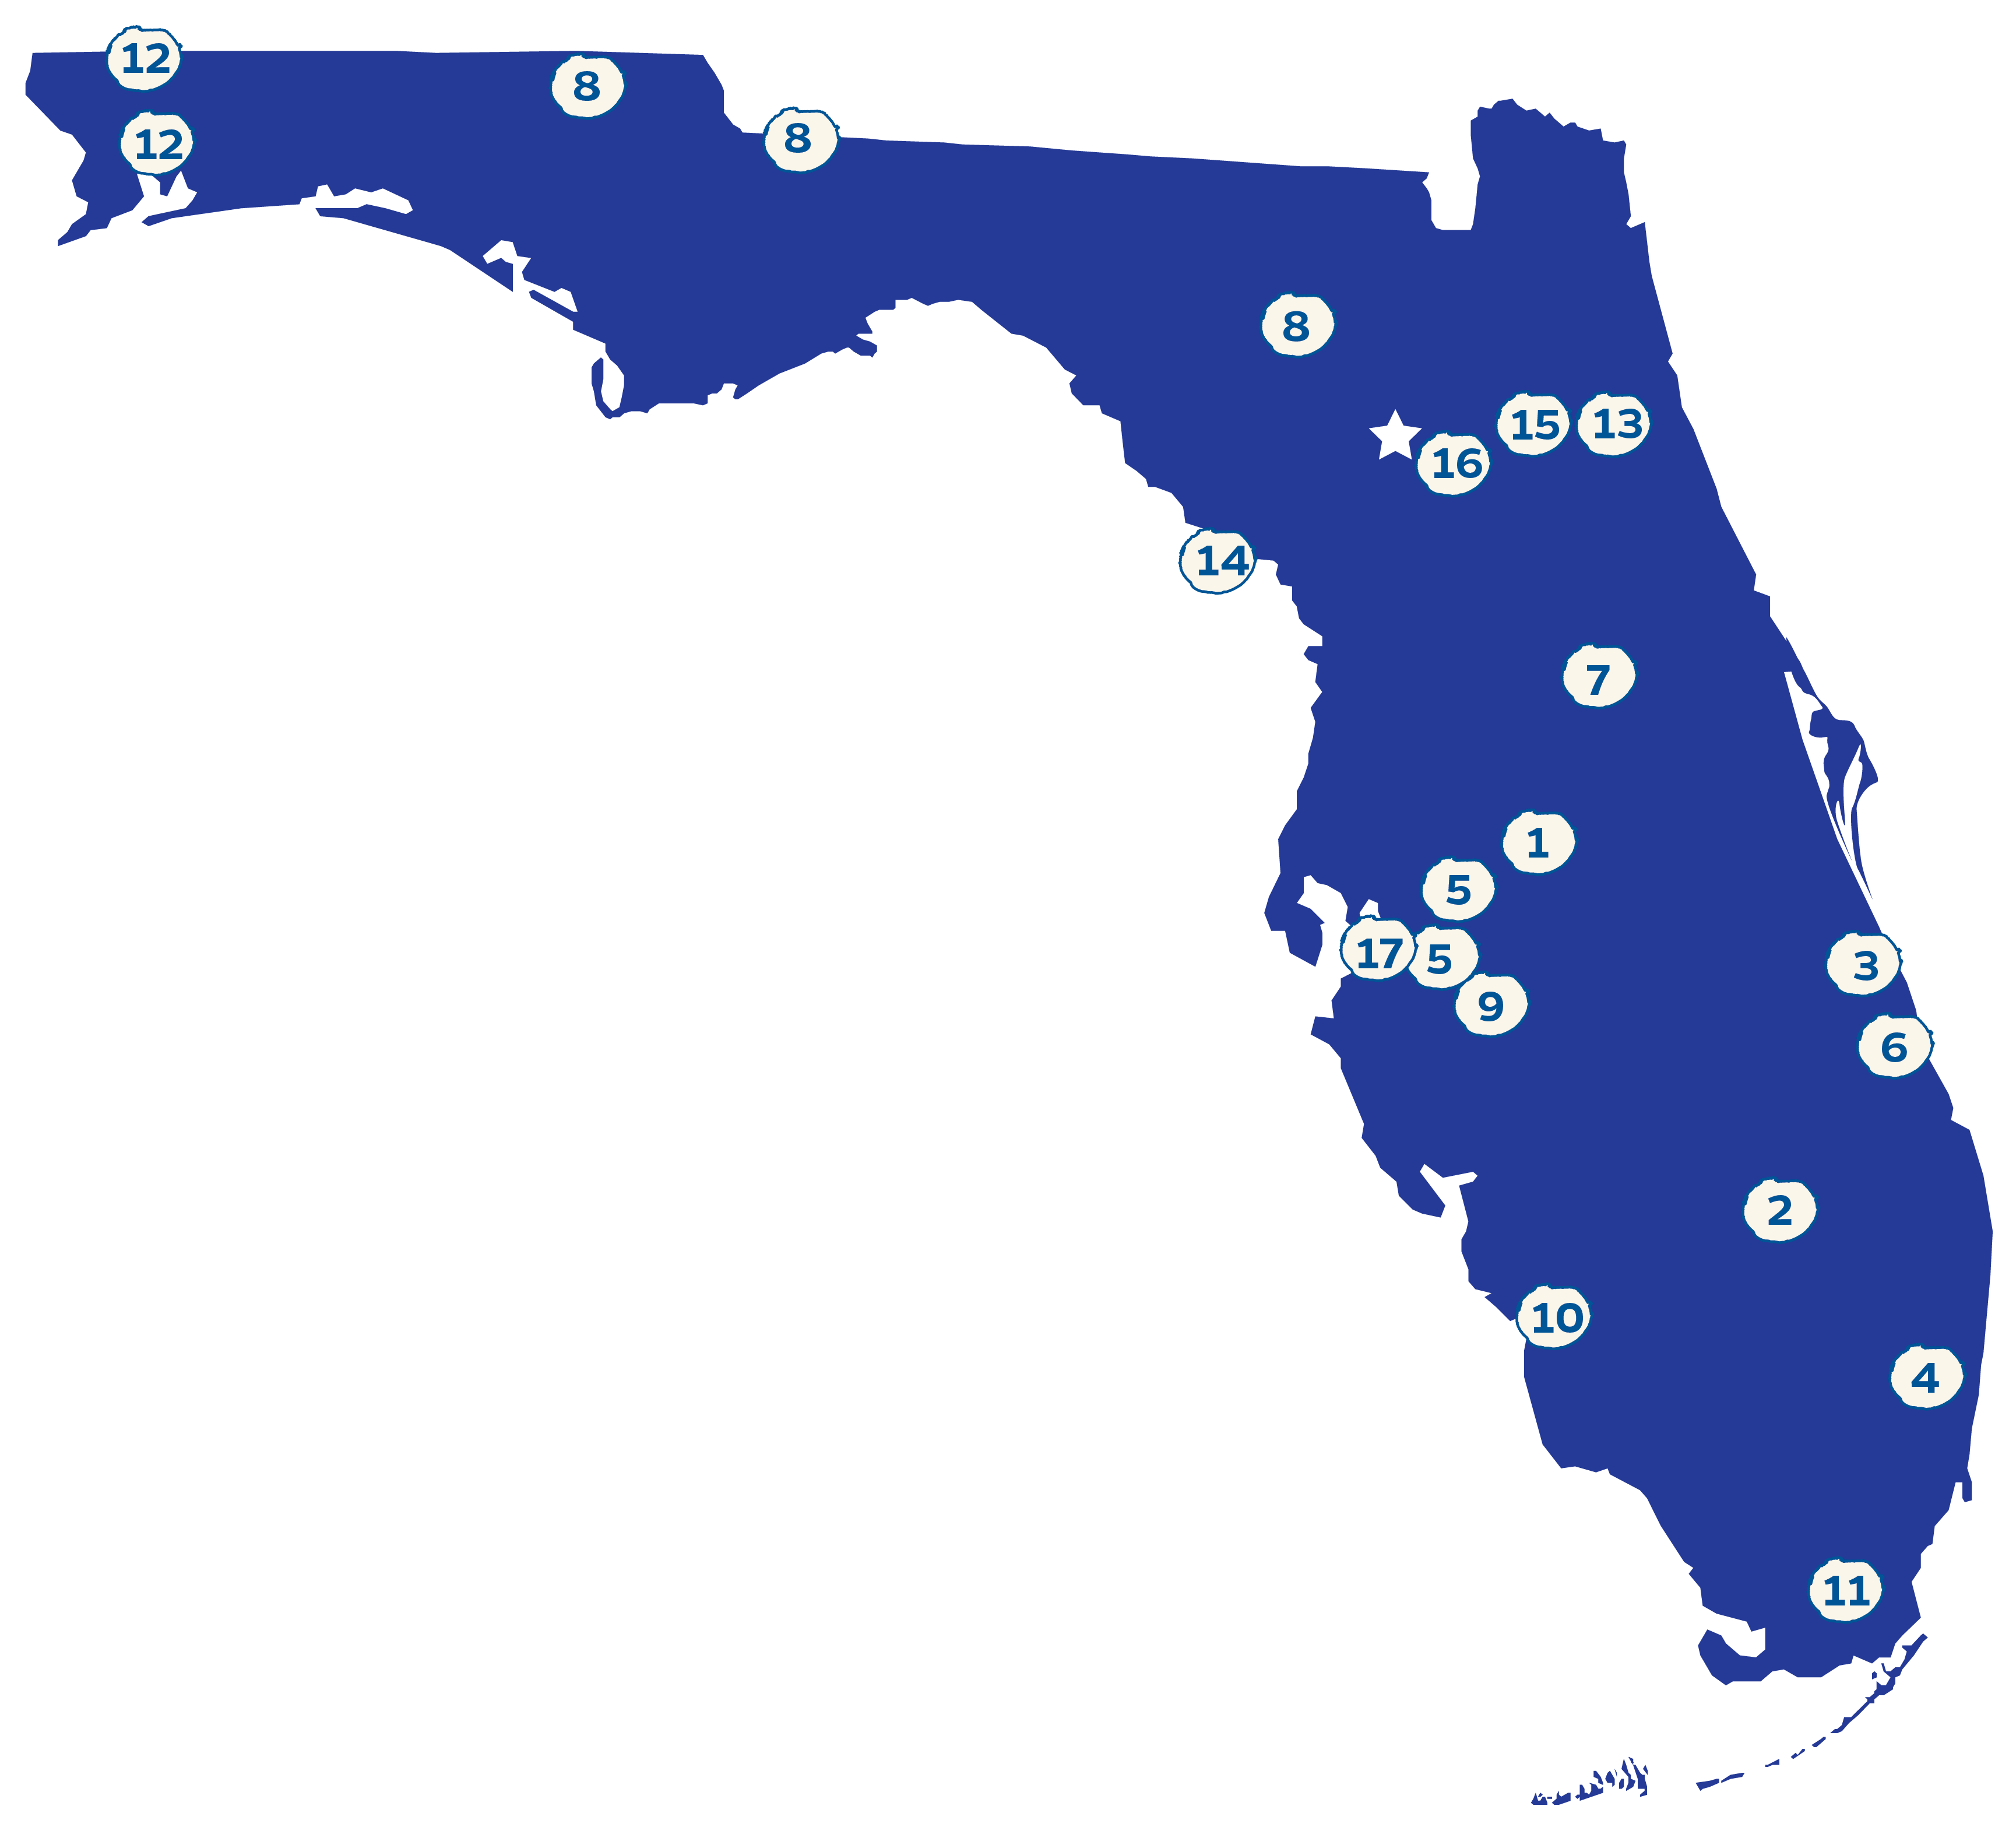 IFAS research facilities map with numbered locations